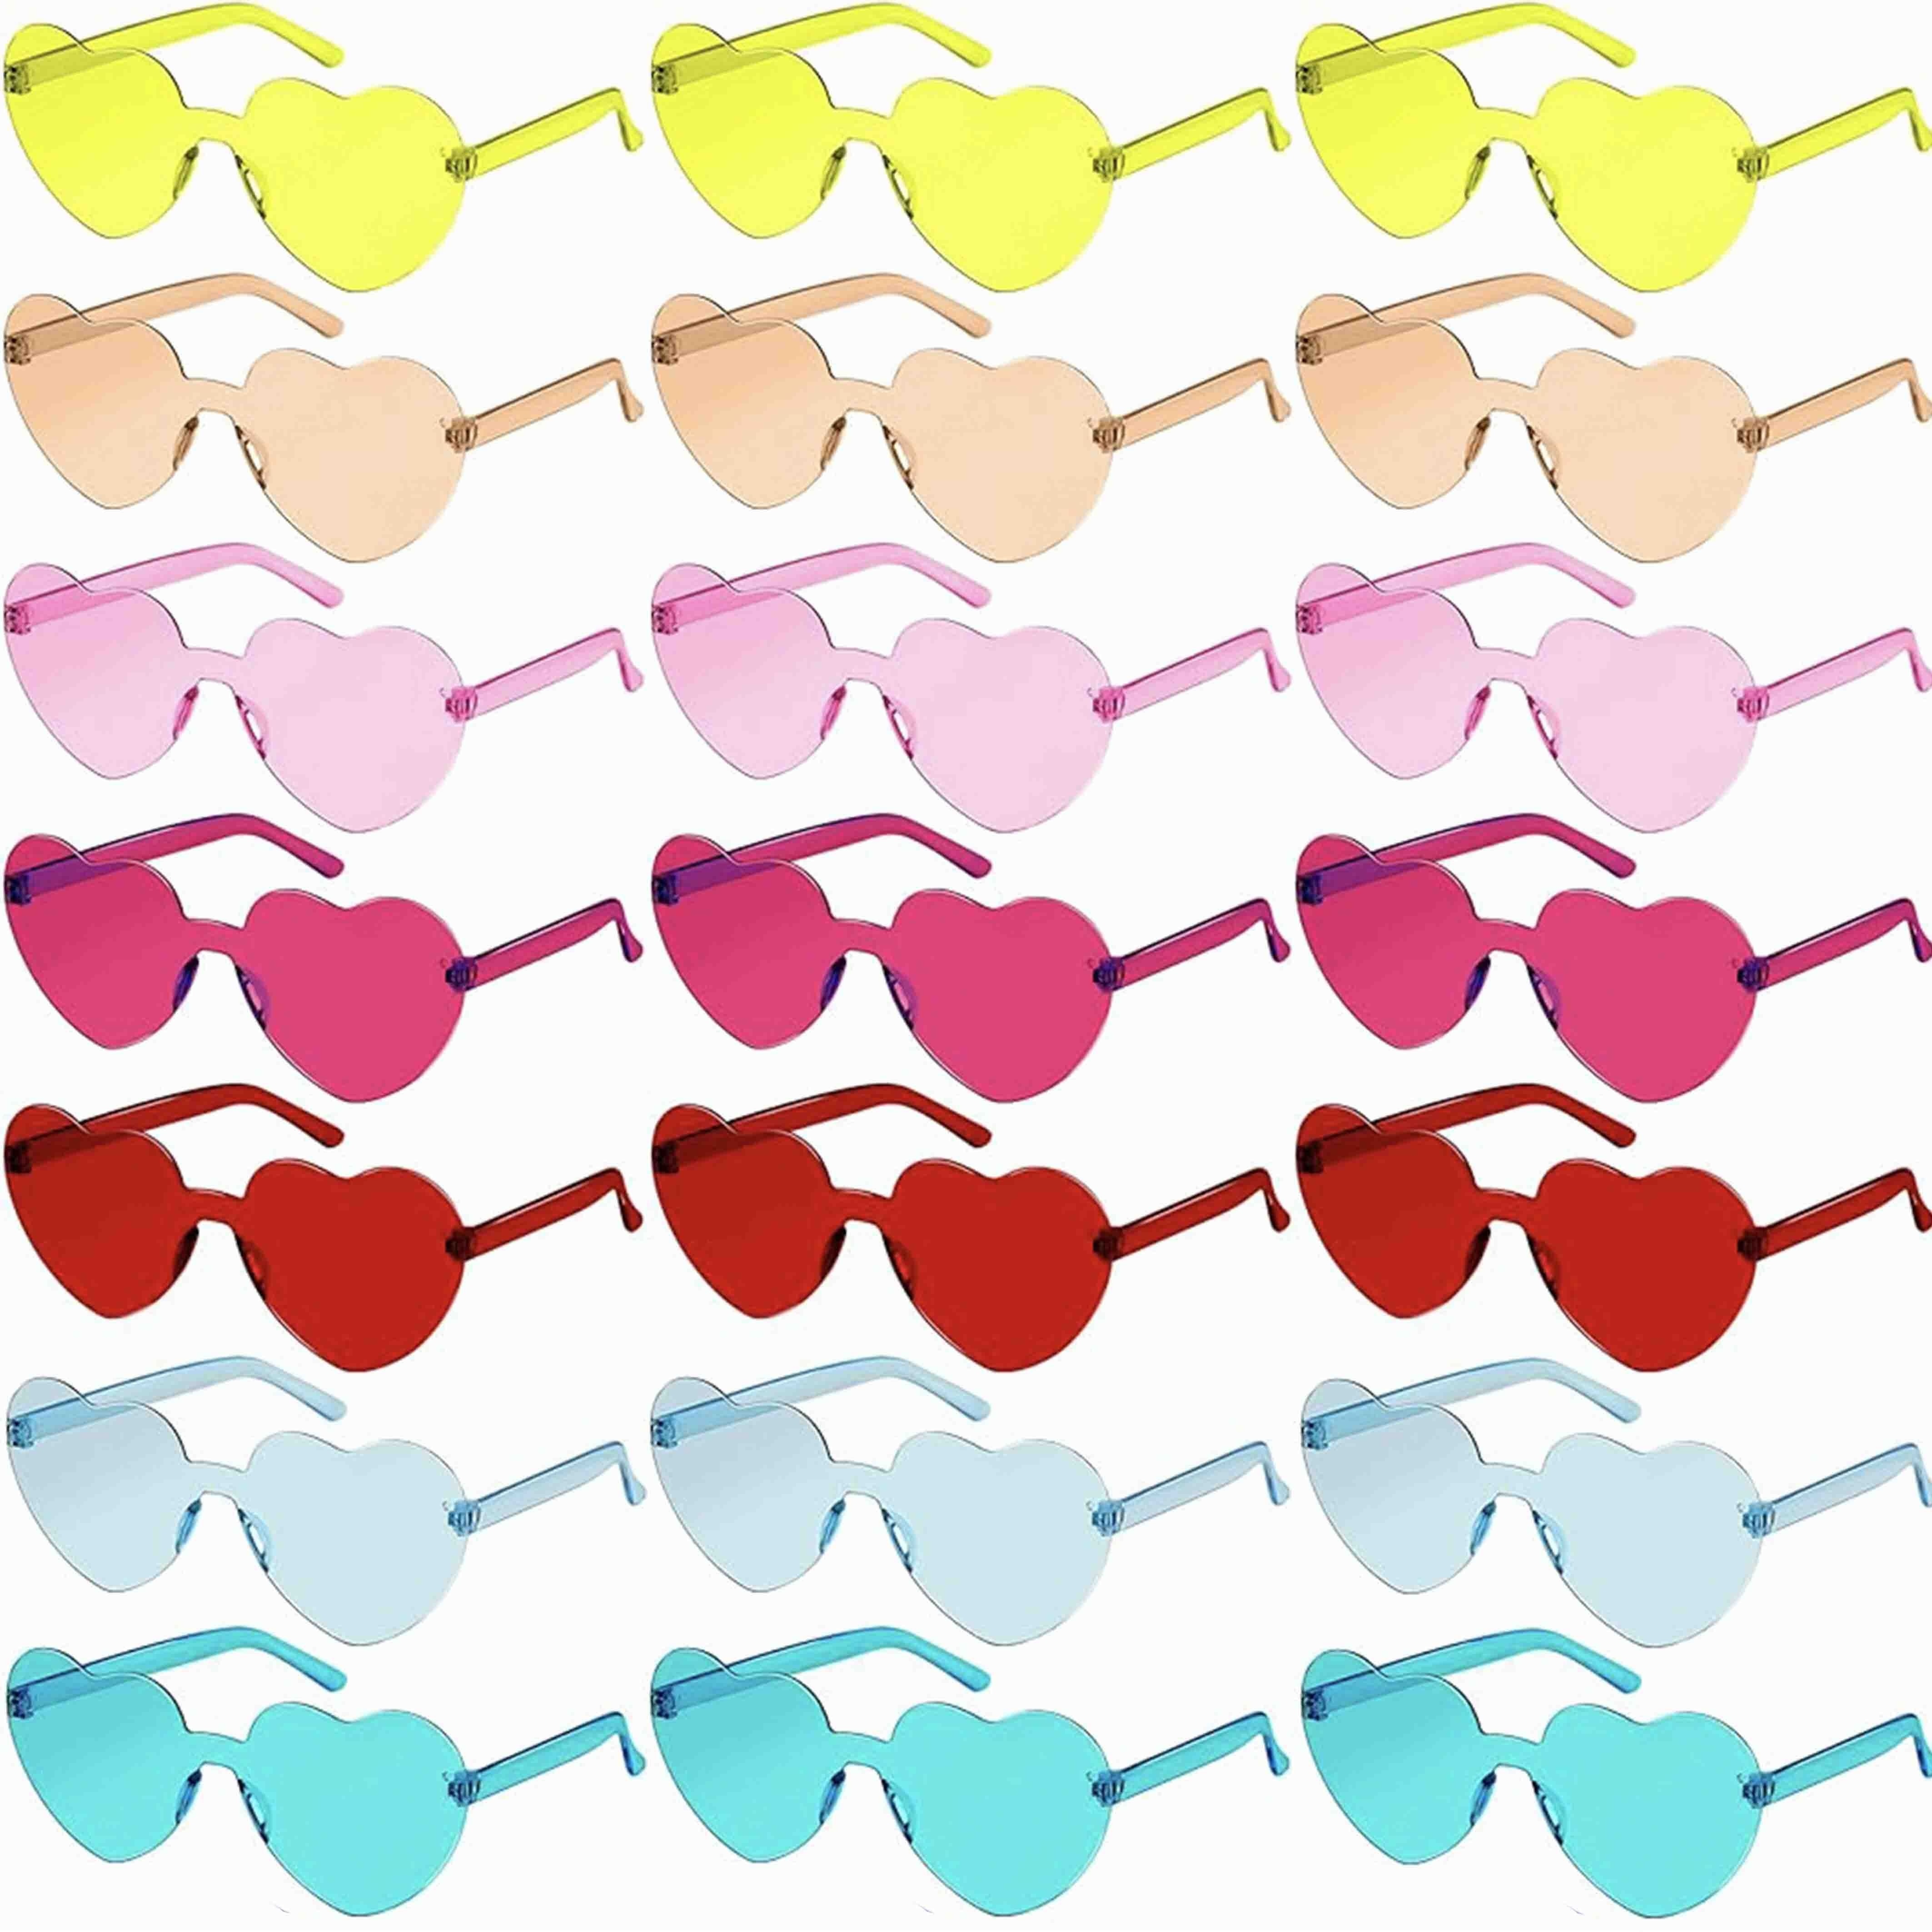 

21pcs Heart Shaped Rimless Glasses For Women Men Cute Candy Color One-piece Decorative Shades For Beach Wedding Party For Music Festival